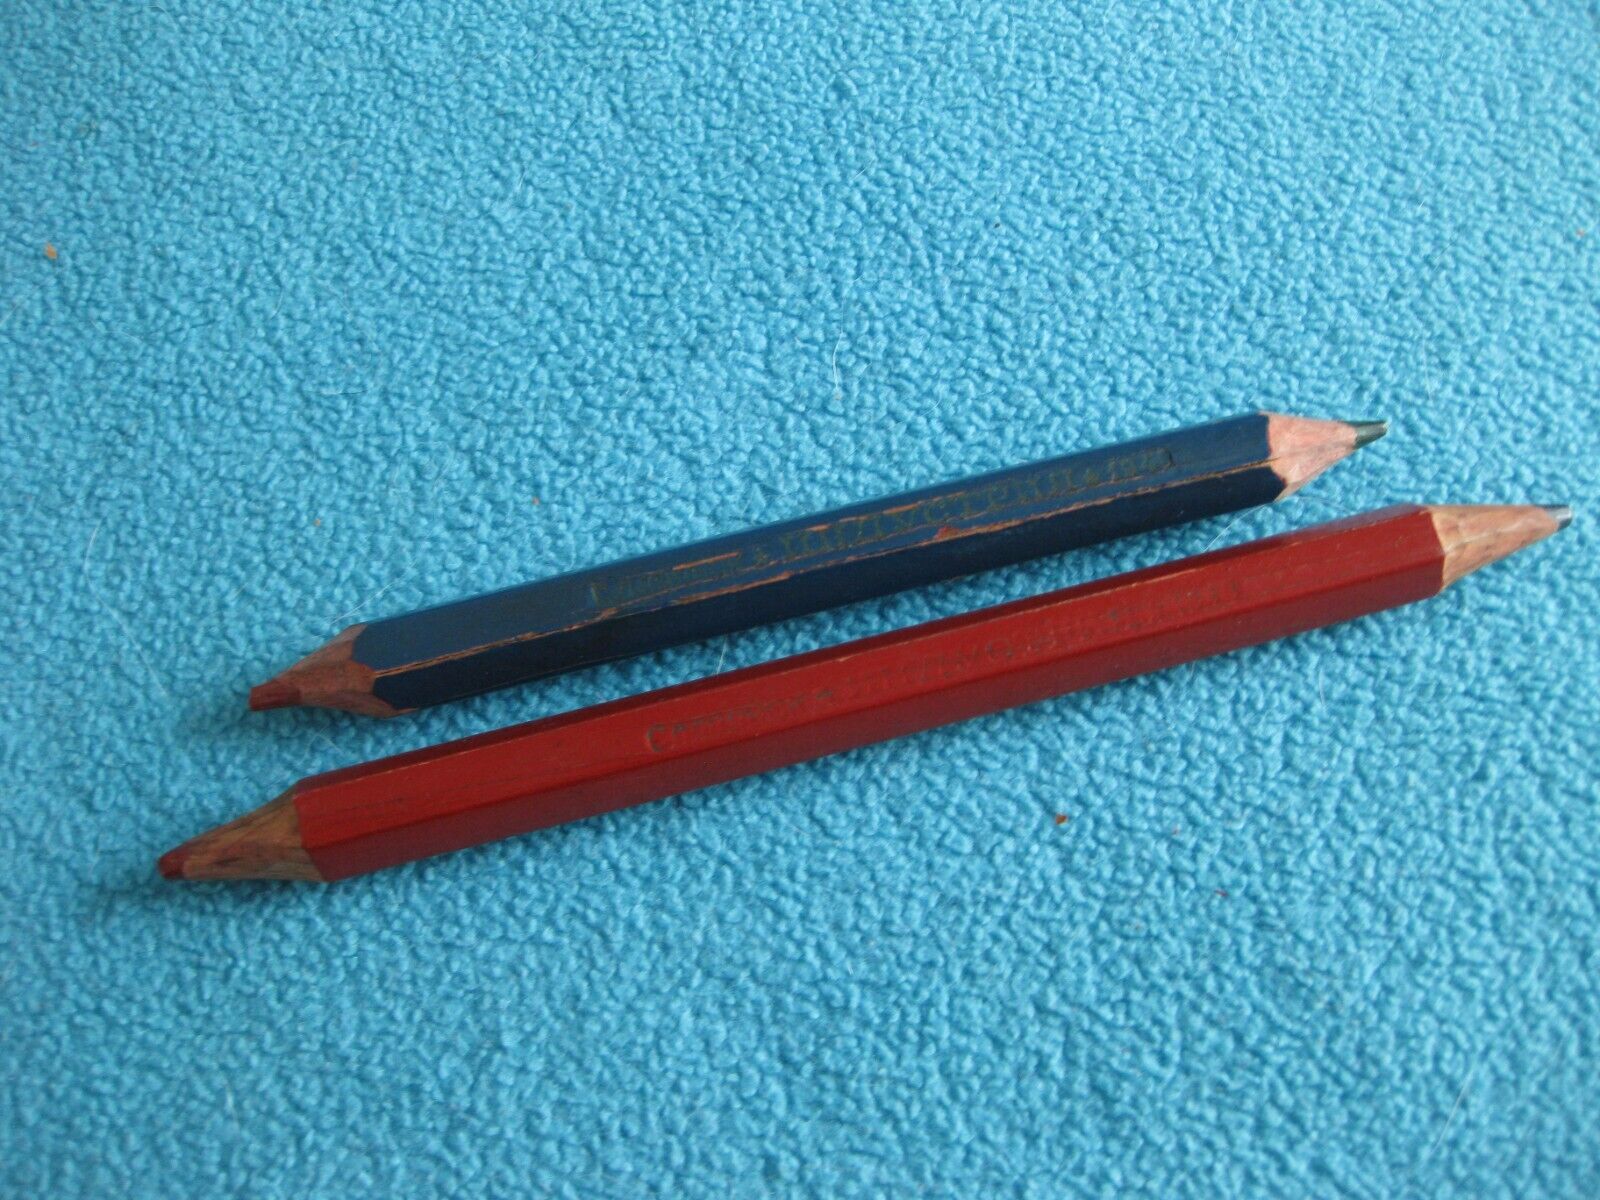 Old Pencils Soviet Union Russian In Military Officers Field Bag Set of 2